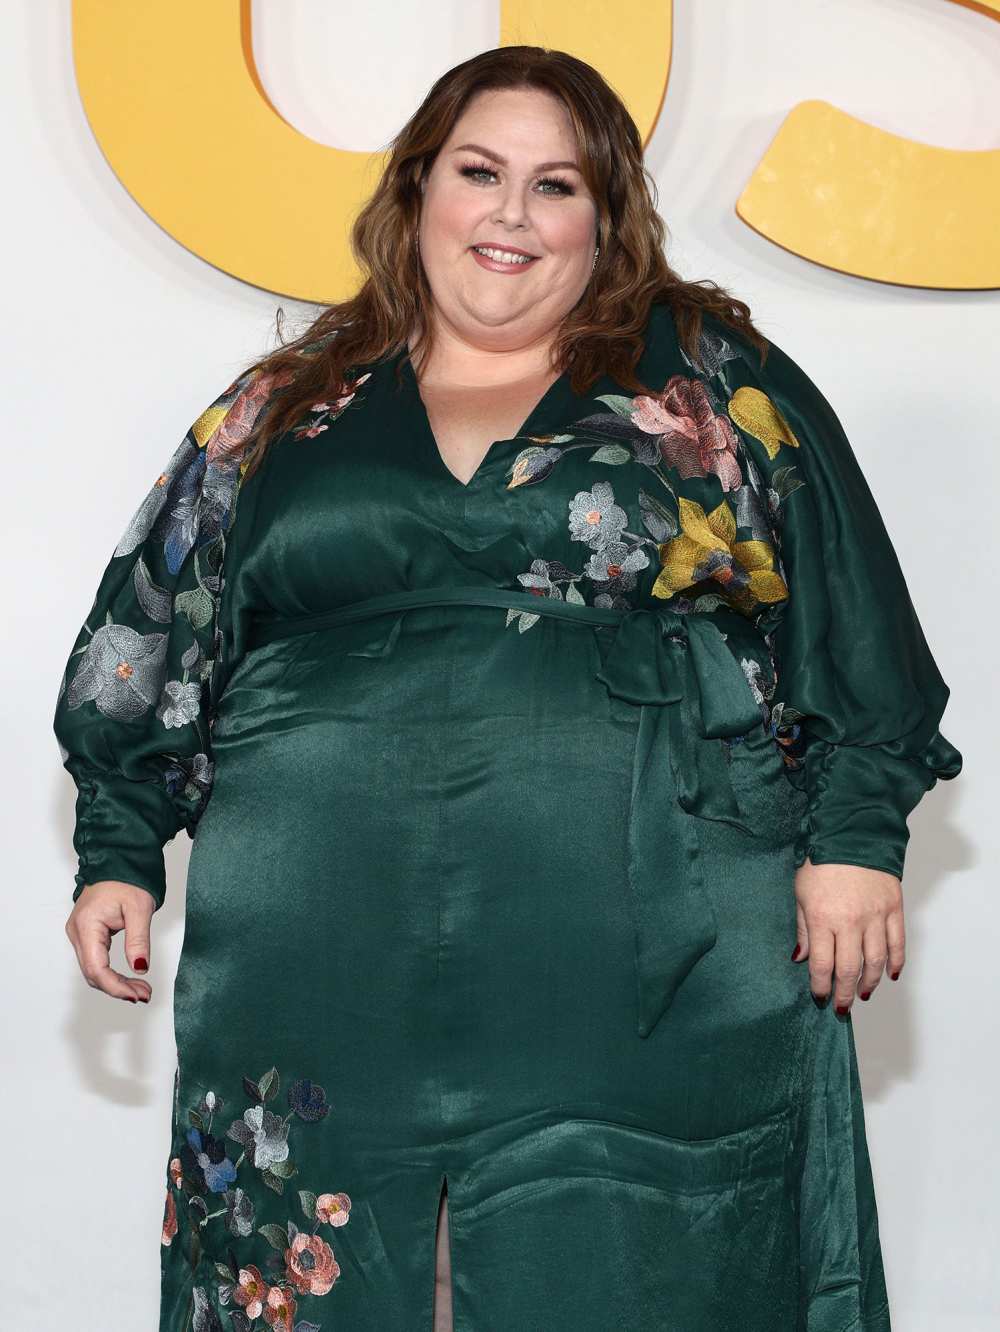 Chrissy Metz Says This Is Us Fans Share Their Eating Disorder Experiences With Her